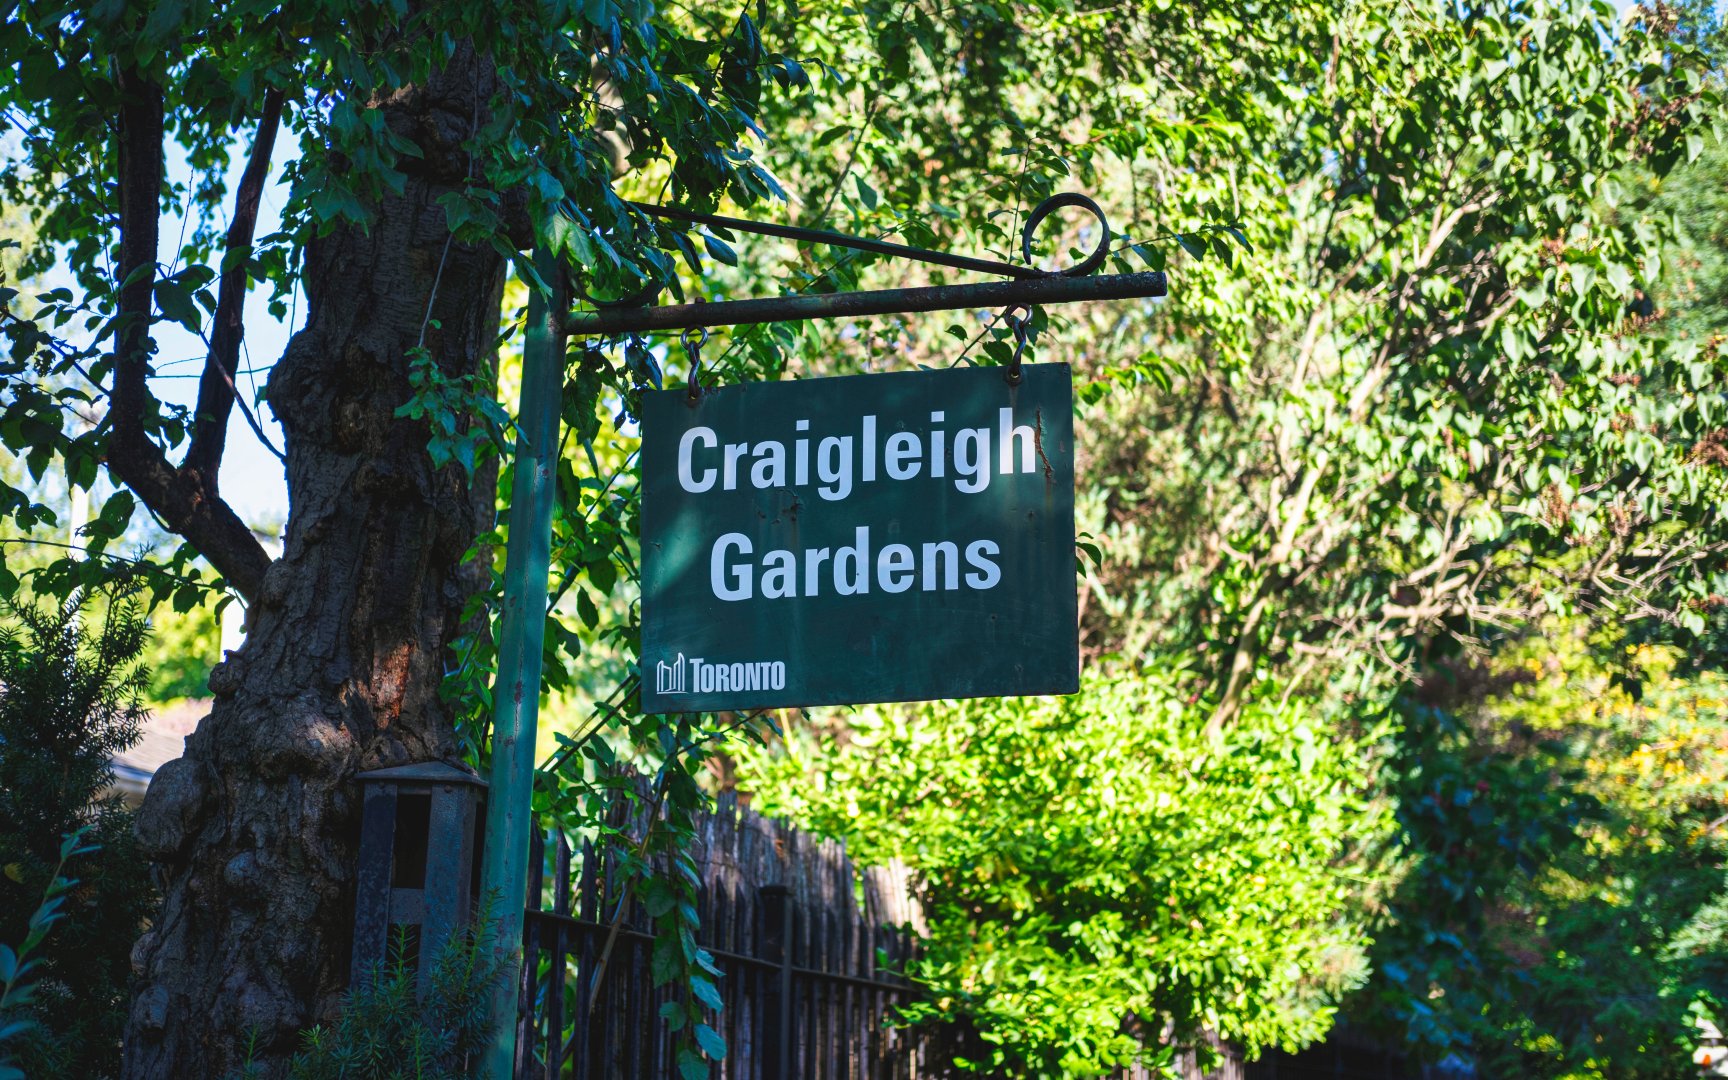 Craigleigh Gardens (c) Photo by SHANE Maps exclusively for SHANE Maps